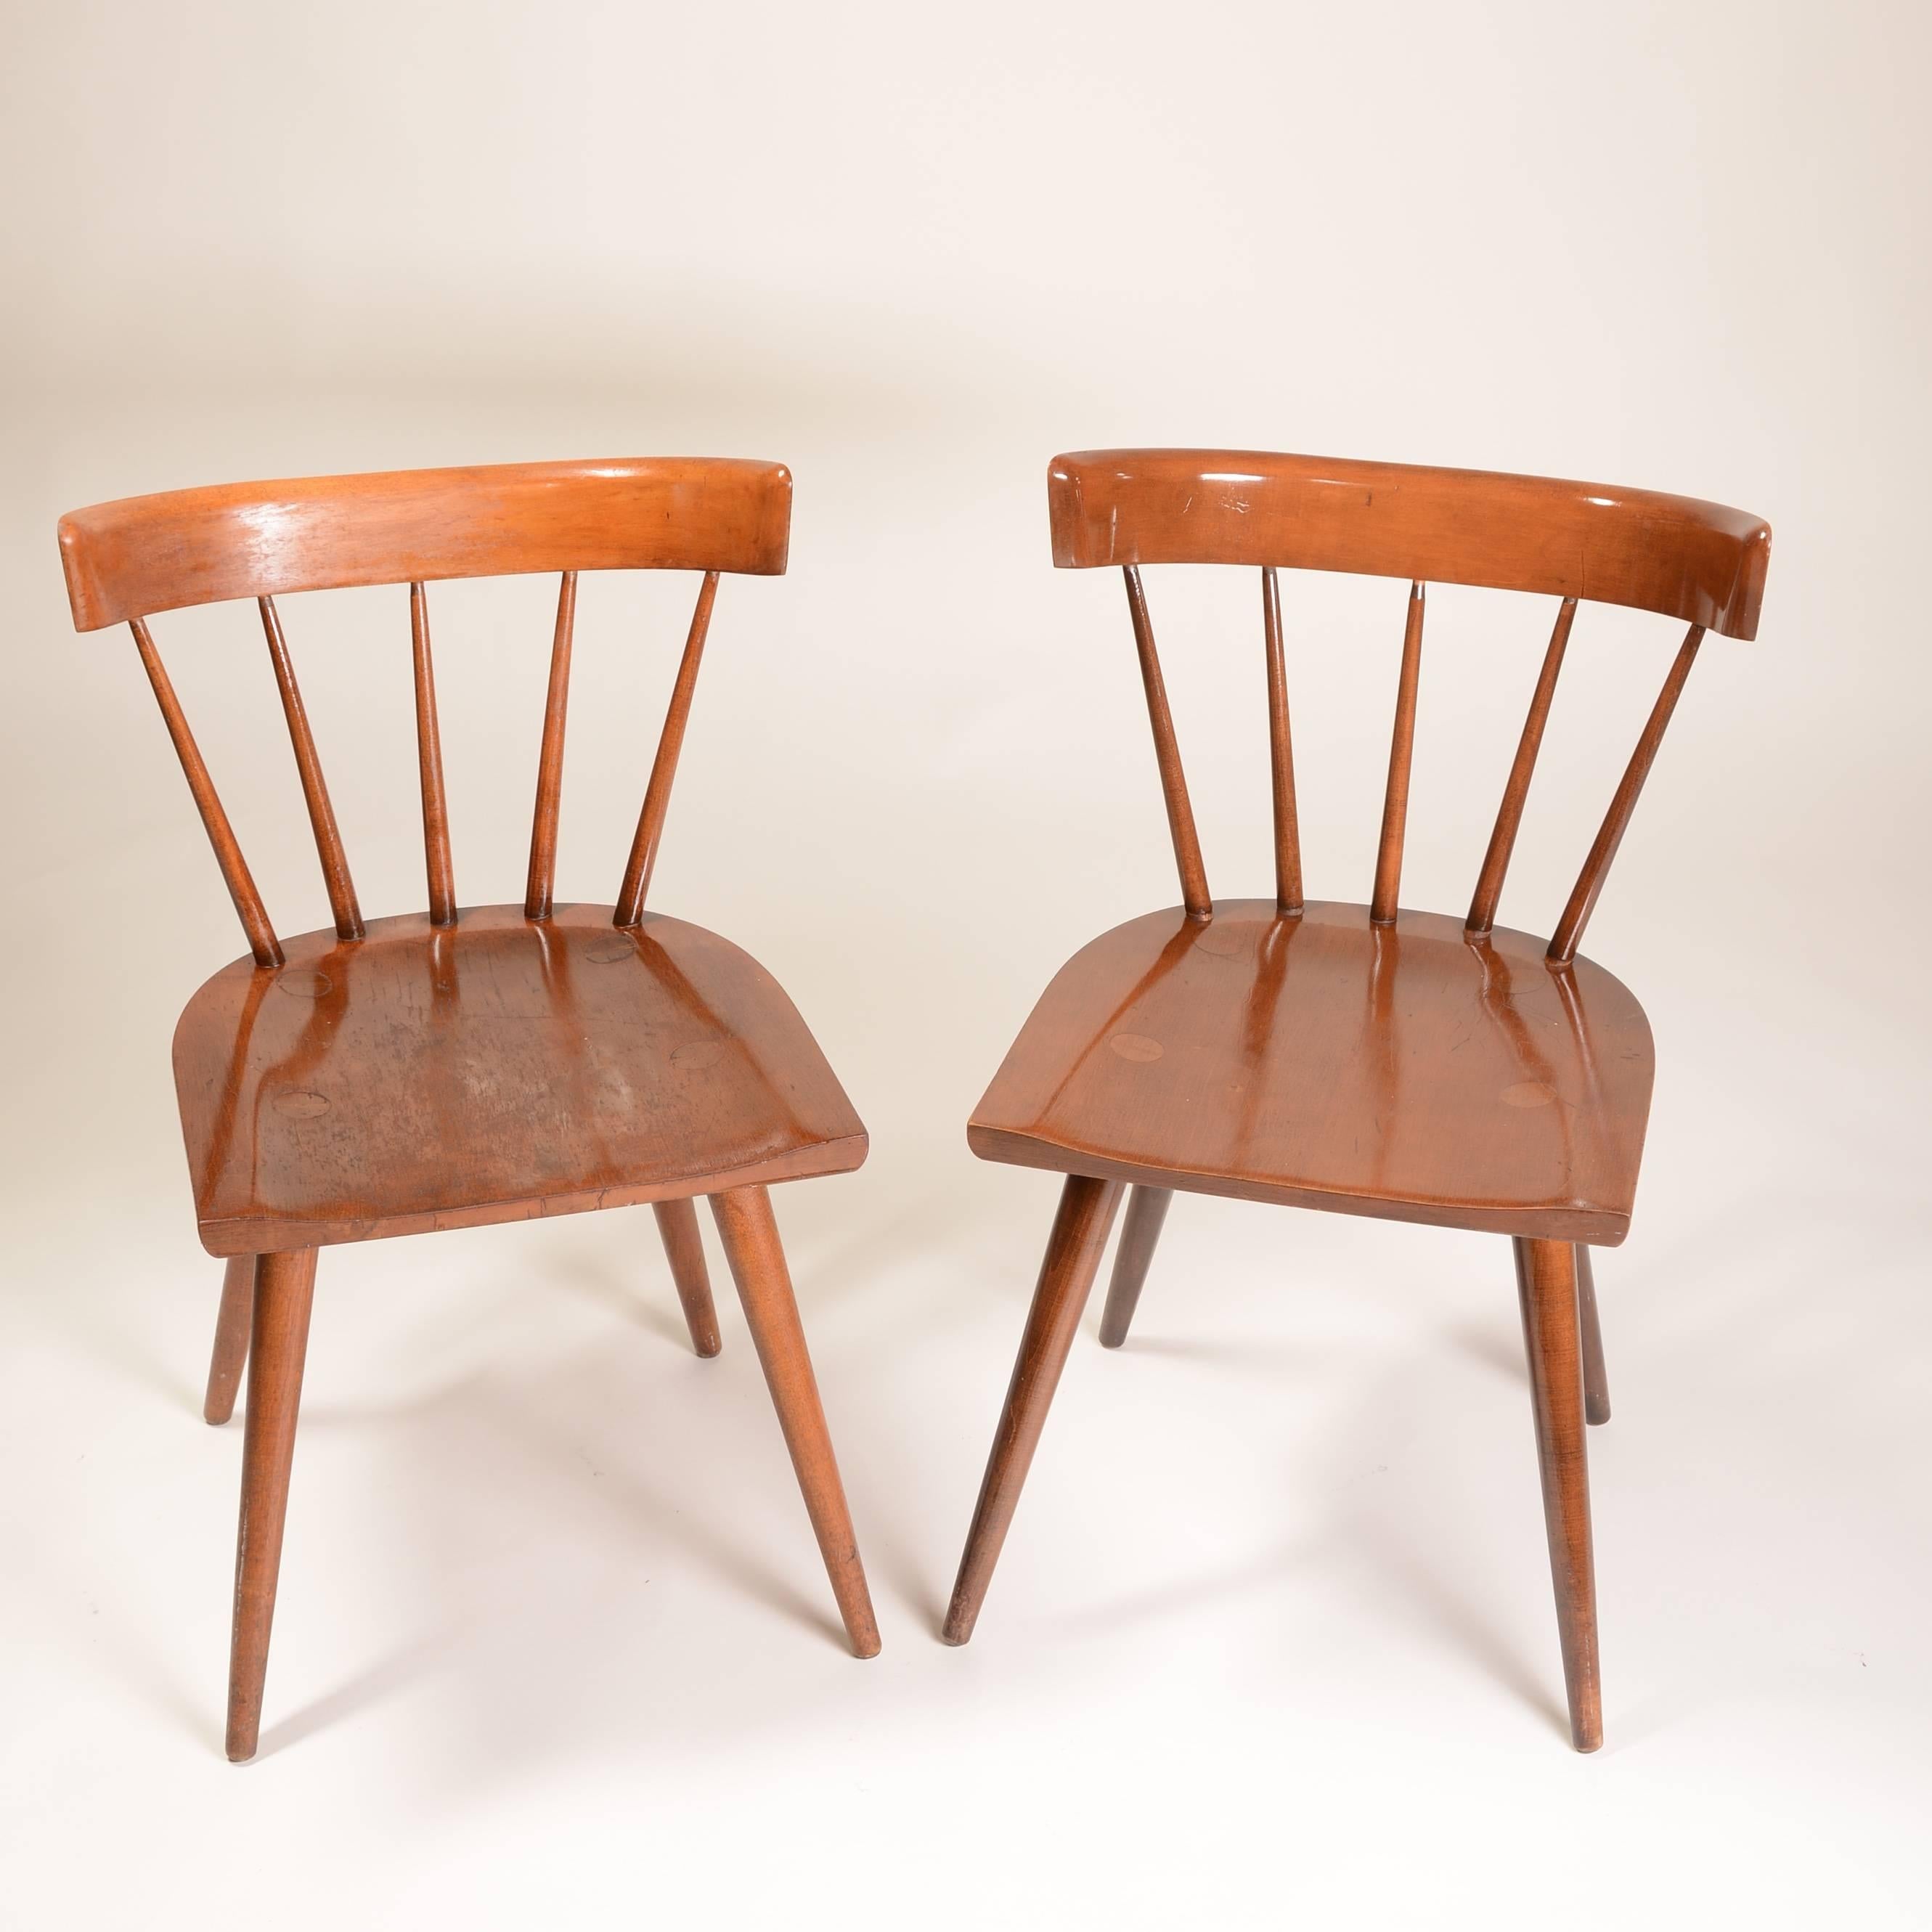 Designed by Paul McCobb for Winchendon's Planner Group line, this pair of Mid-Century chairs are made out of gorgeous stained maple. Clean lines and curved back support make them a sophisticated and unique edition to your home.
 